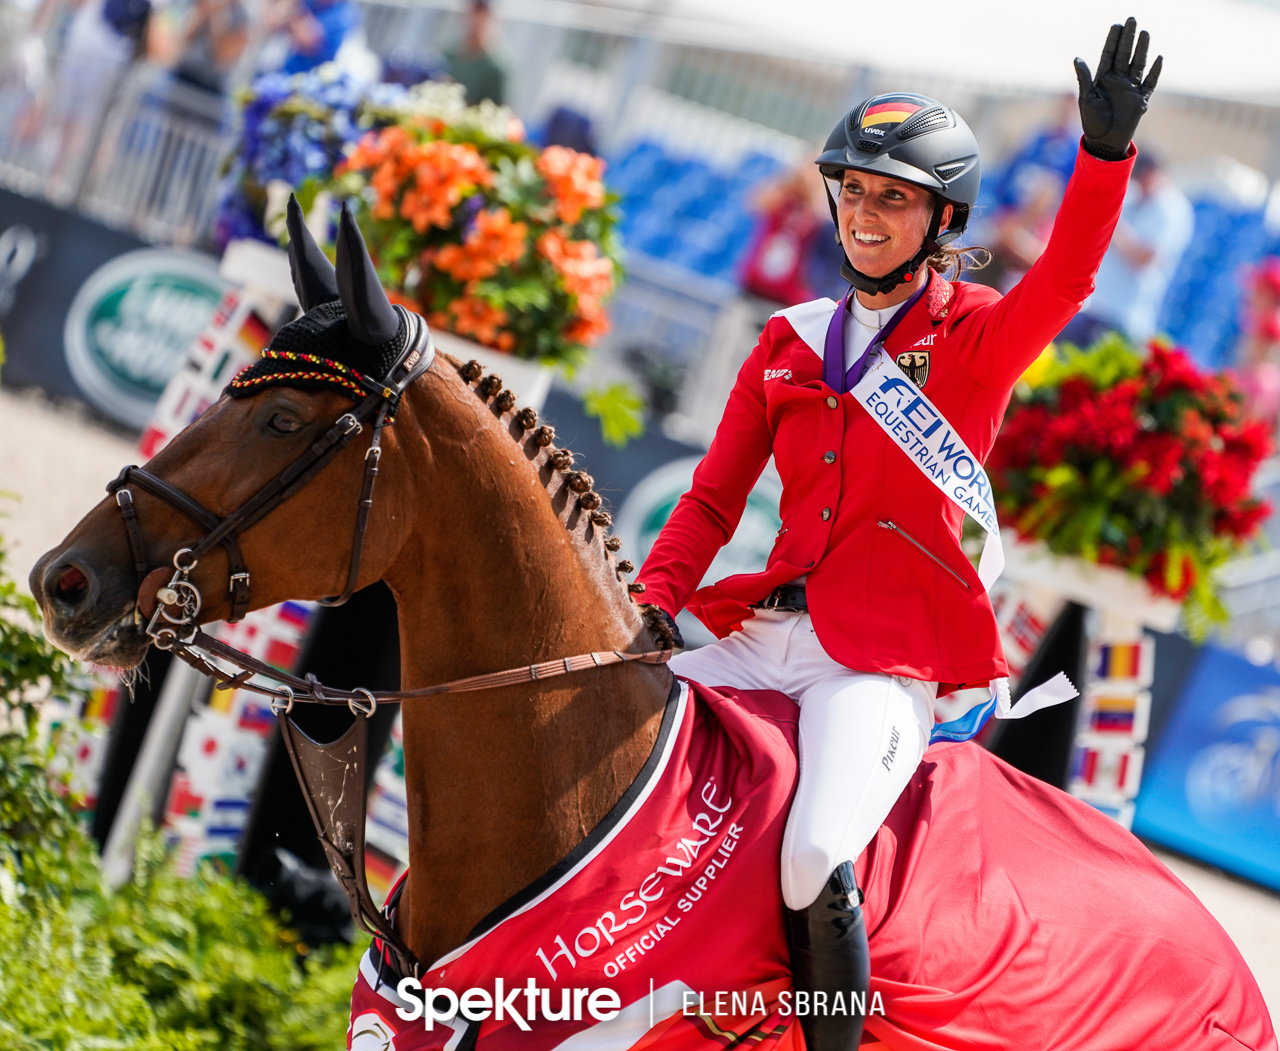 Earchphoto - World Champion Simone Blum salutes the crowd during the victory lap at the 2018 World Equestrian Games in Tryon NC